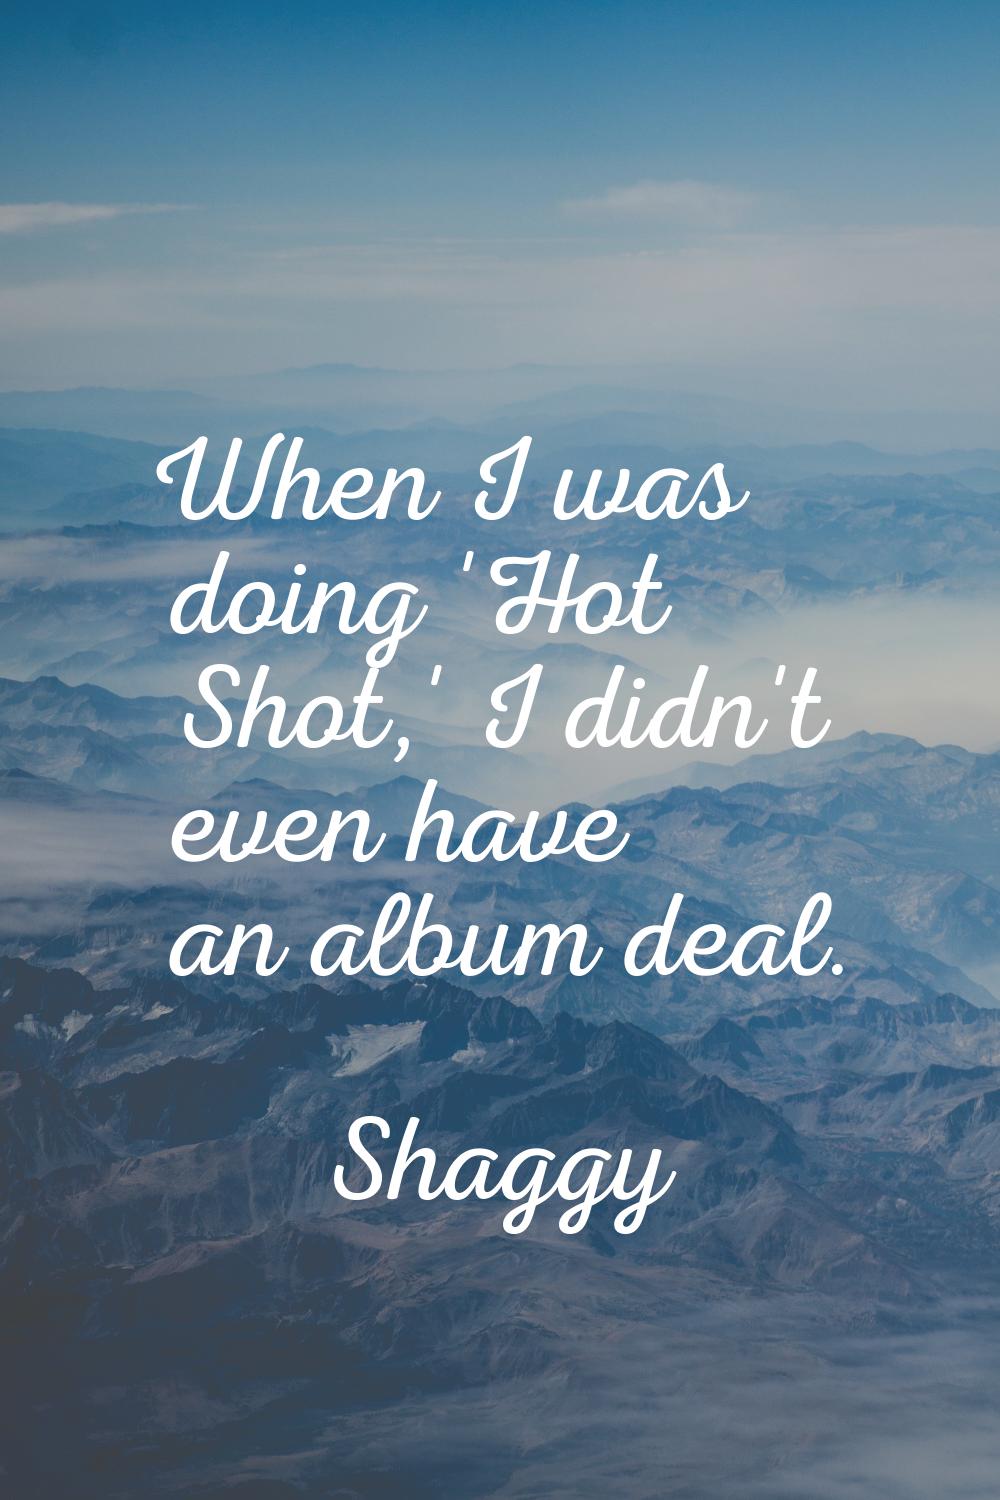 When I was doing 'Hot Shot,' I didn't even have an album deal.